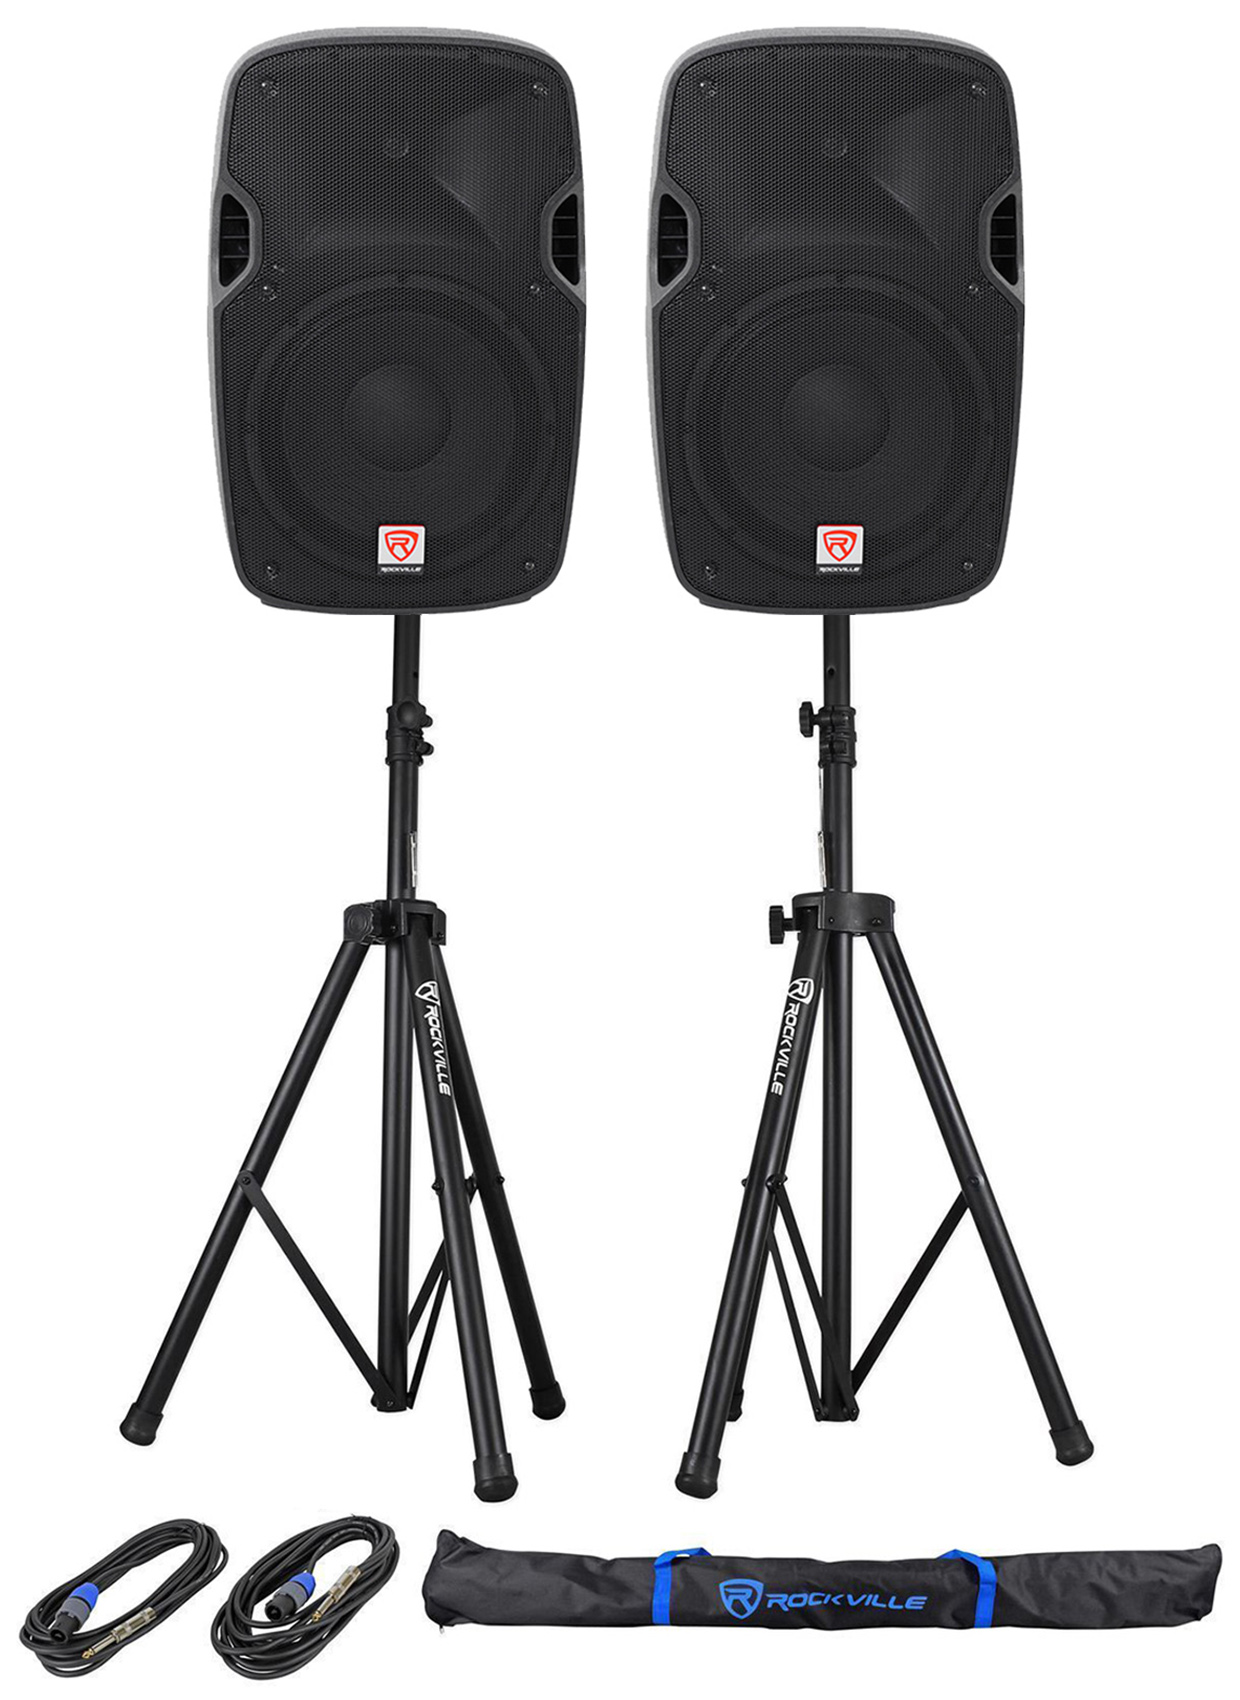 (2) Rockville SPGN128 12" 8-Ohm Passive 2400w DJ PA Speakers+Stands+Cables+Bag